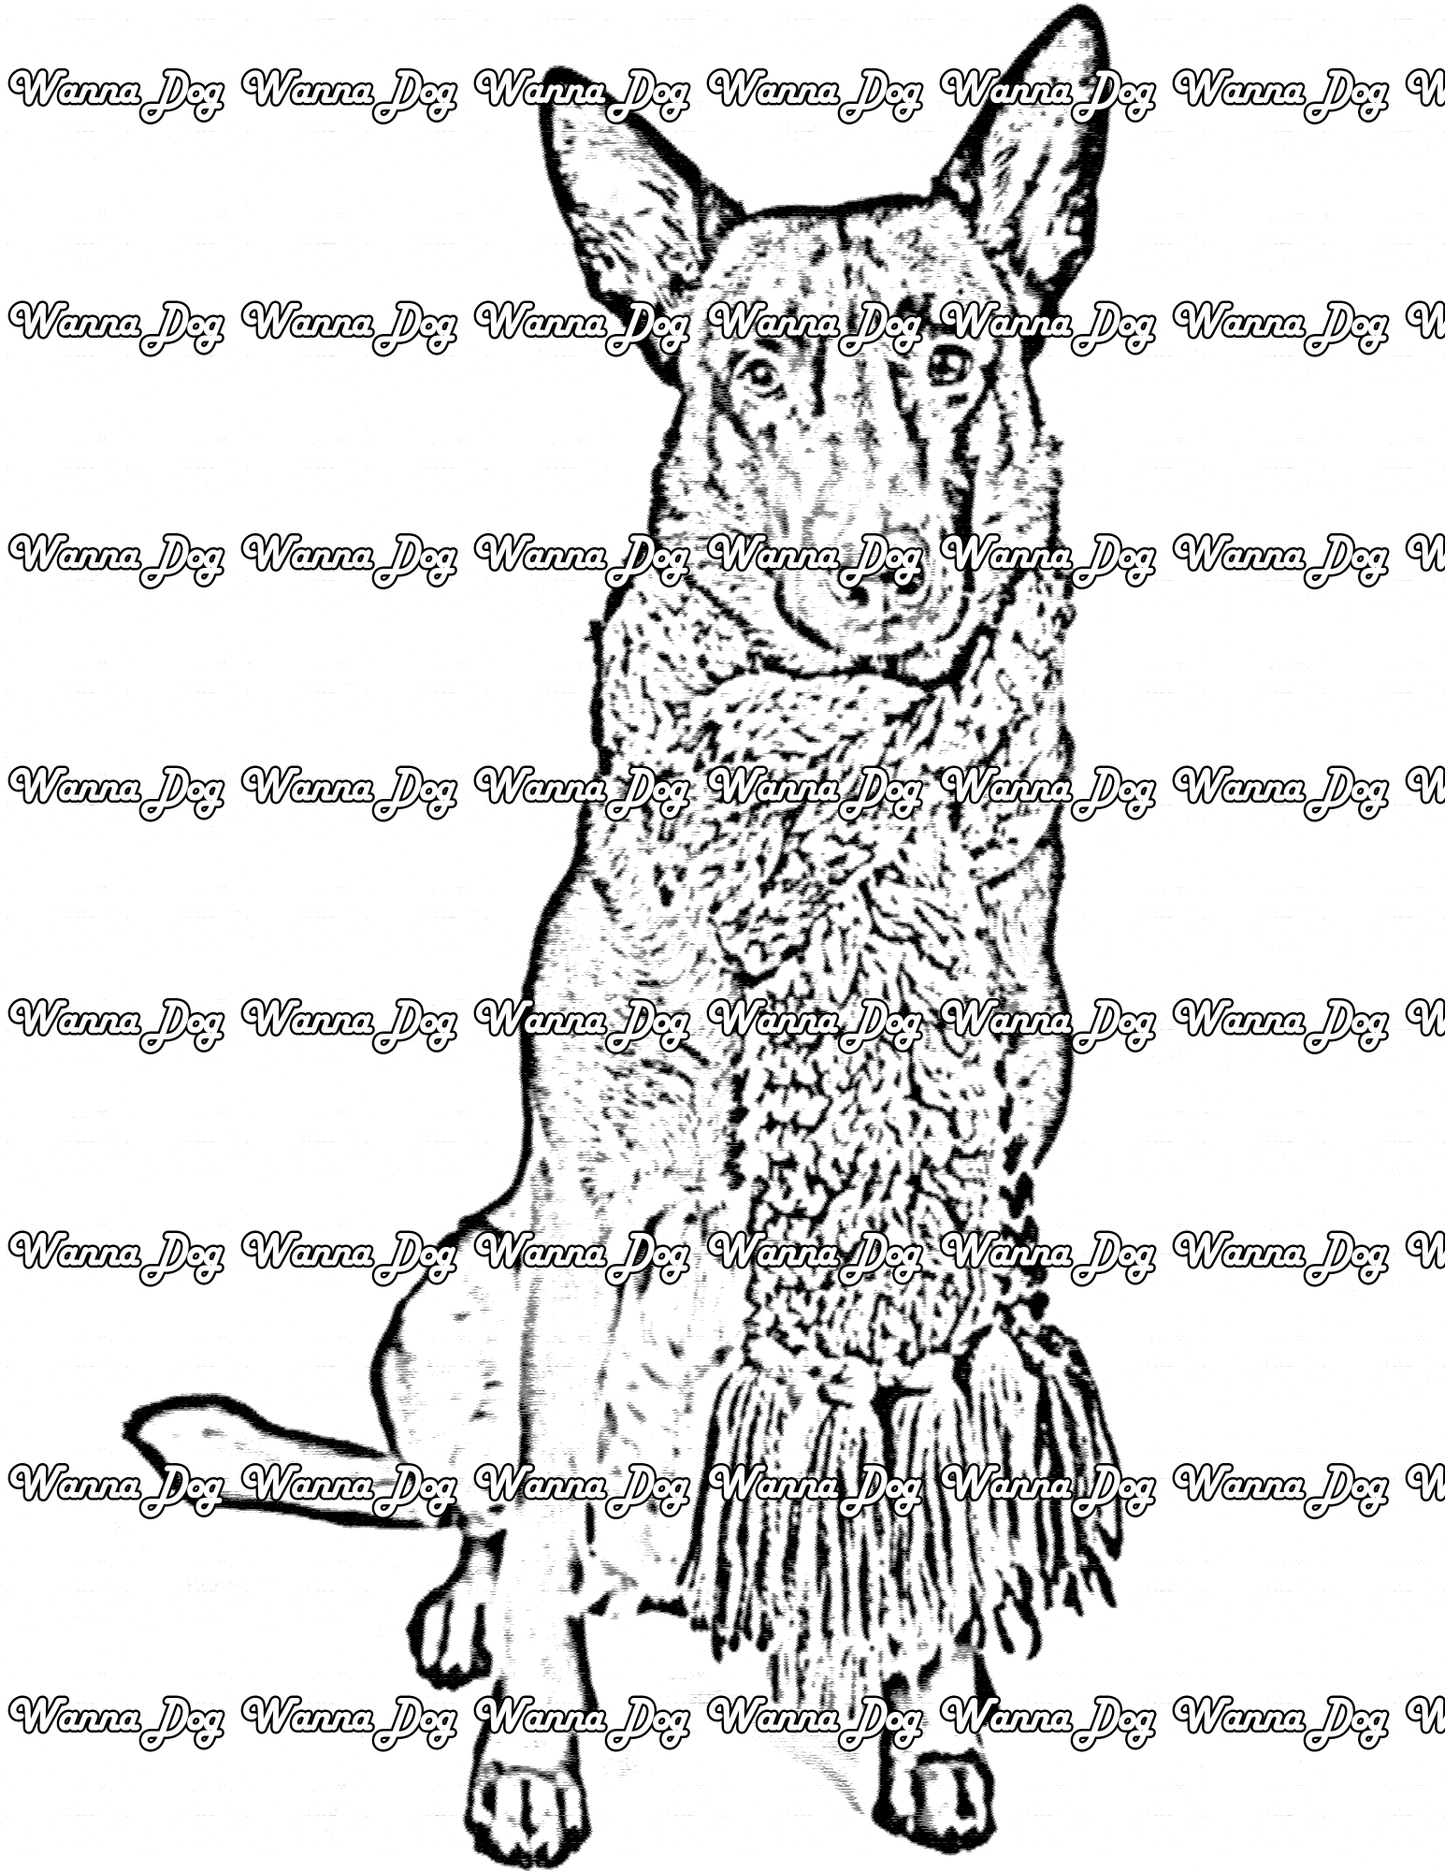 Belgian Malinois Coloring Page of a Belgian Malinois wearing a scarf